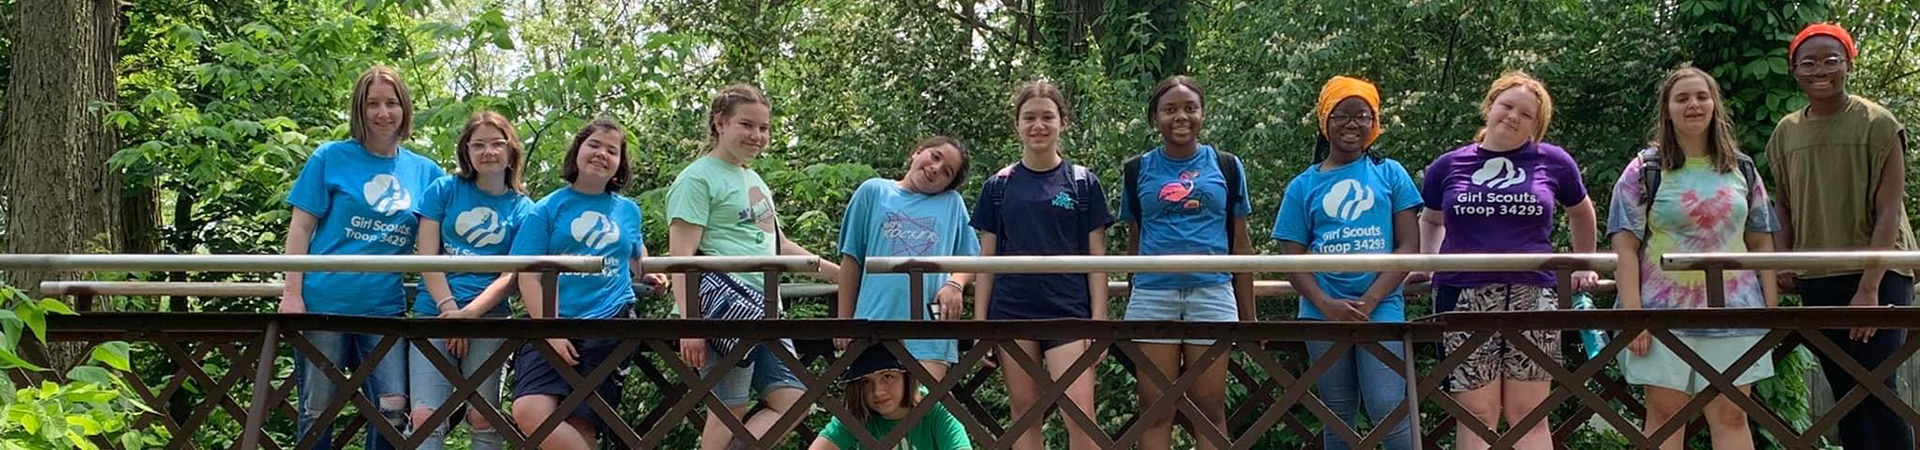  Girl Scouts standing on a bridge in the forest. 